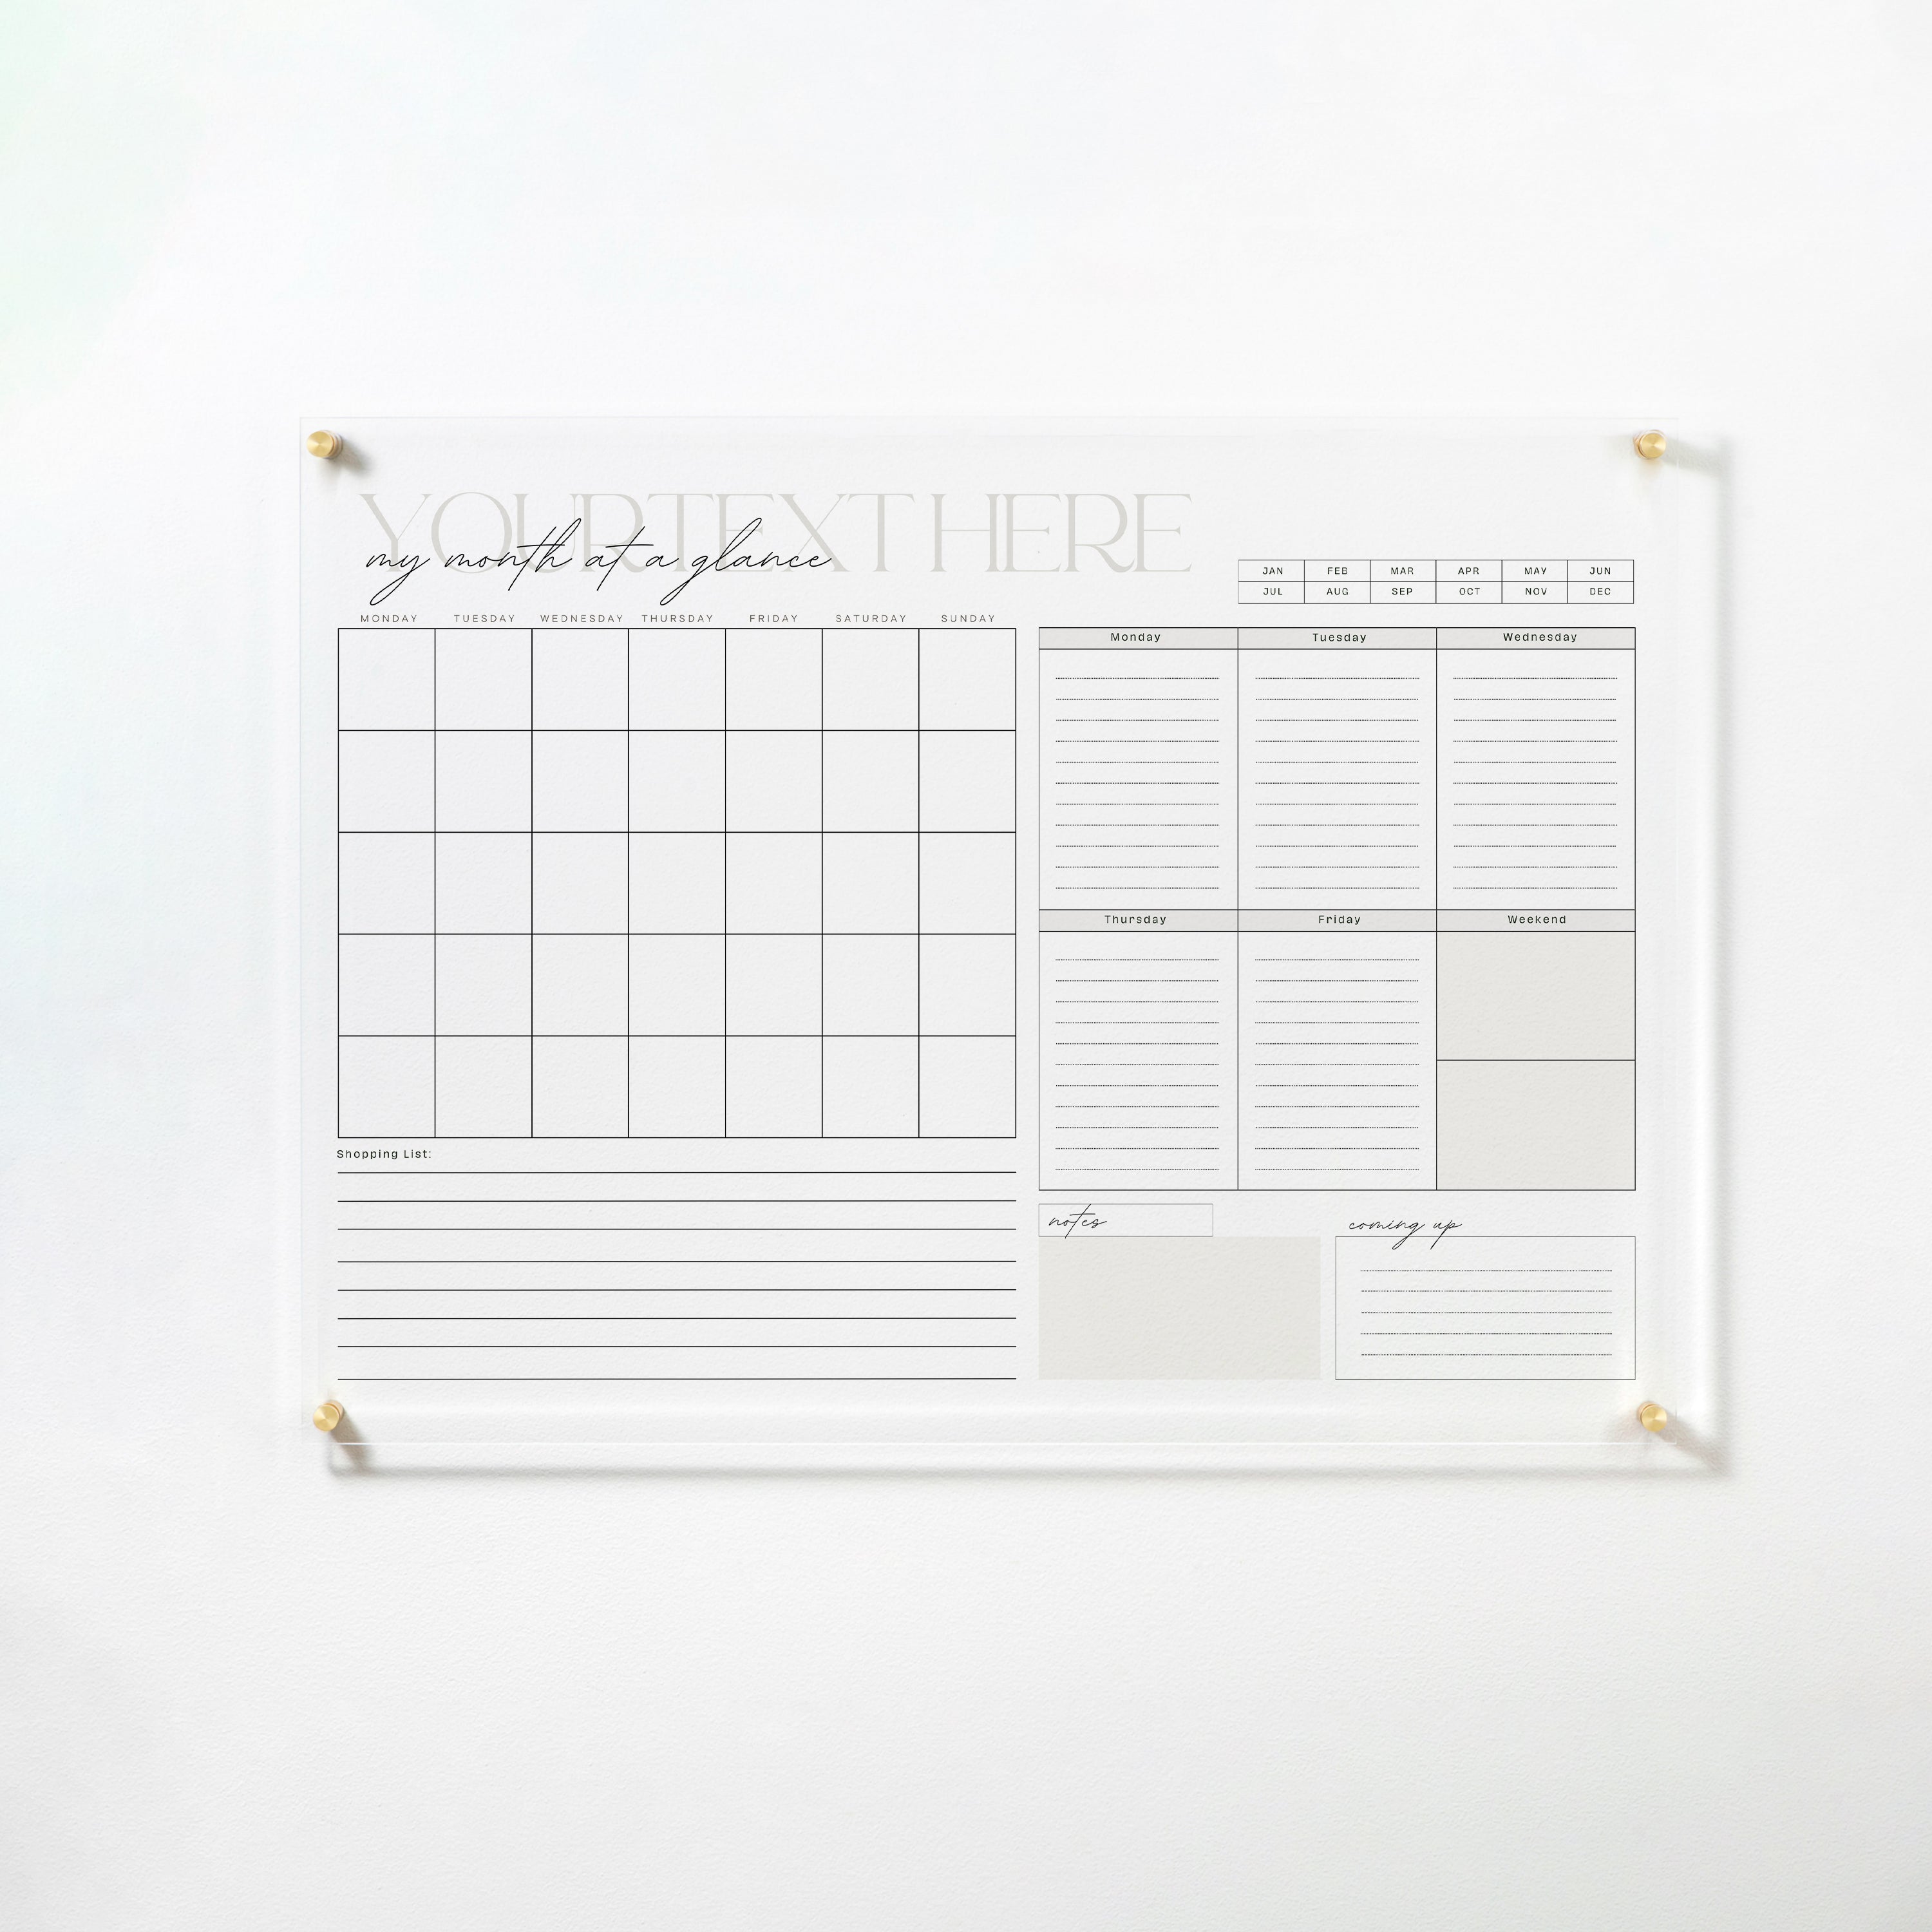 "Custom Weekly Monthly Calendar - Neutral Chic" dry erase acrylic board mounted on a white wall with gold pins. It features a monthly calendar grid, sections for each day of the week, notes, and upcoming events in neutral tones, providing a chic and functional planning tool.